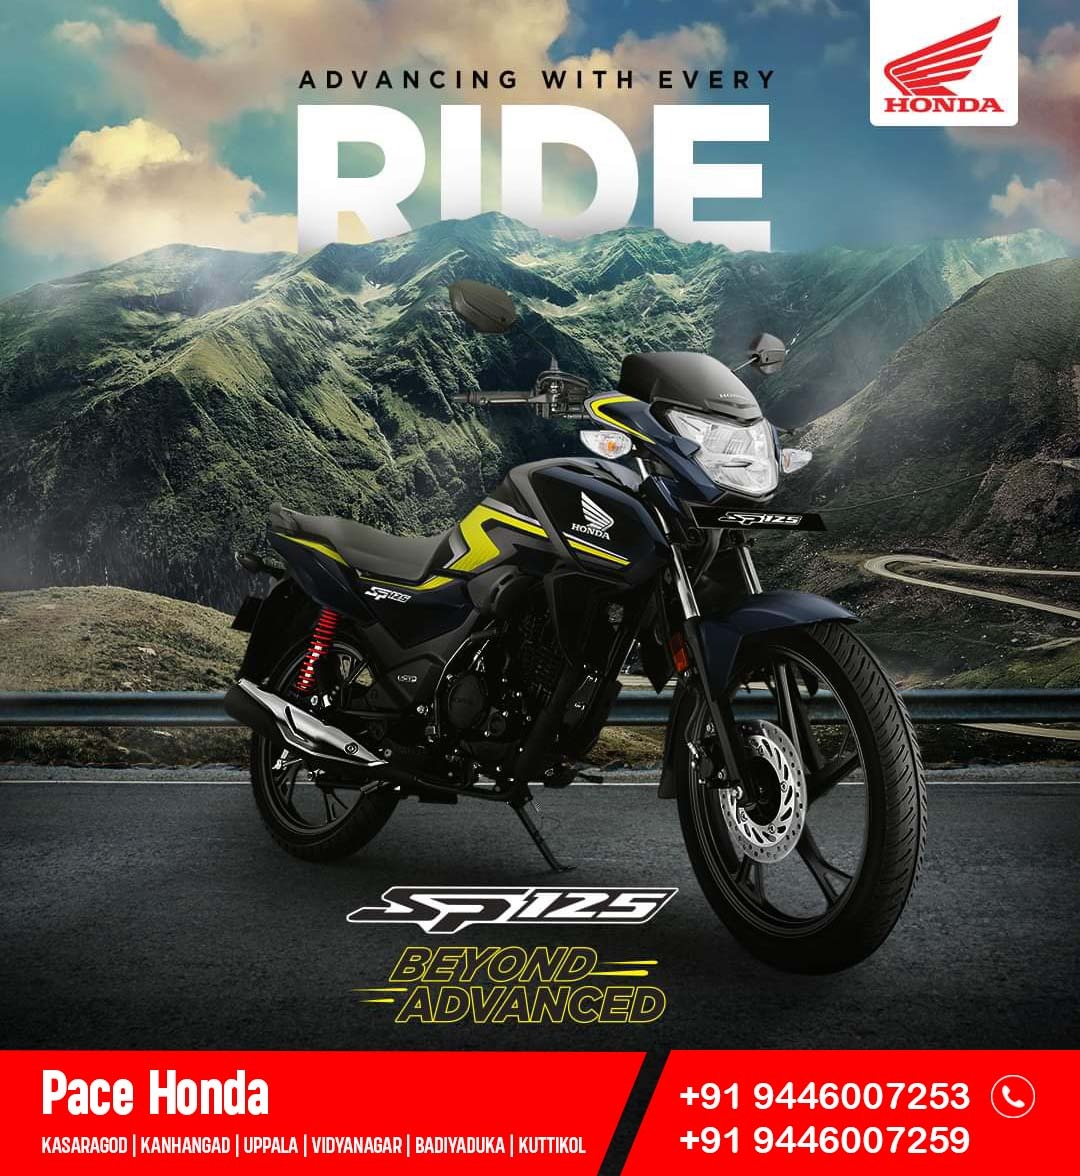 For riders who are passionate about exploring every corner, SP125 is made just for you. Advancing with you, this bike has the coolest features for a thrilling experience.

📲 9446007253, 9446007259

#PaceHonda #Honda2Wheelers #Honda #Sp125 #HondaIndia #BeyondAdvanced #HondaSp125